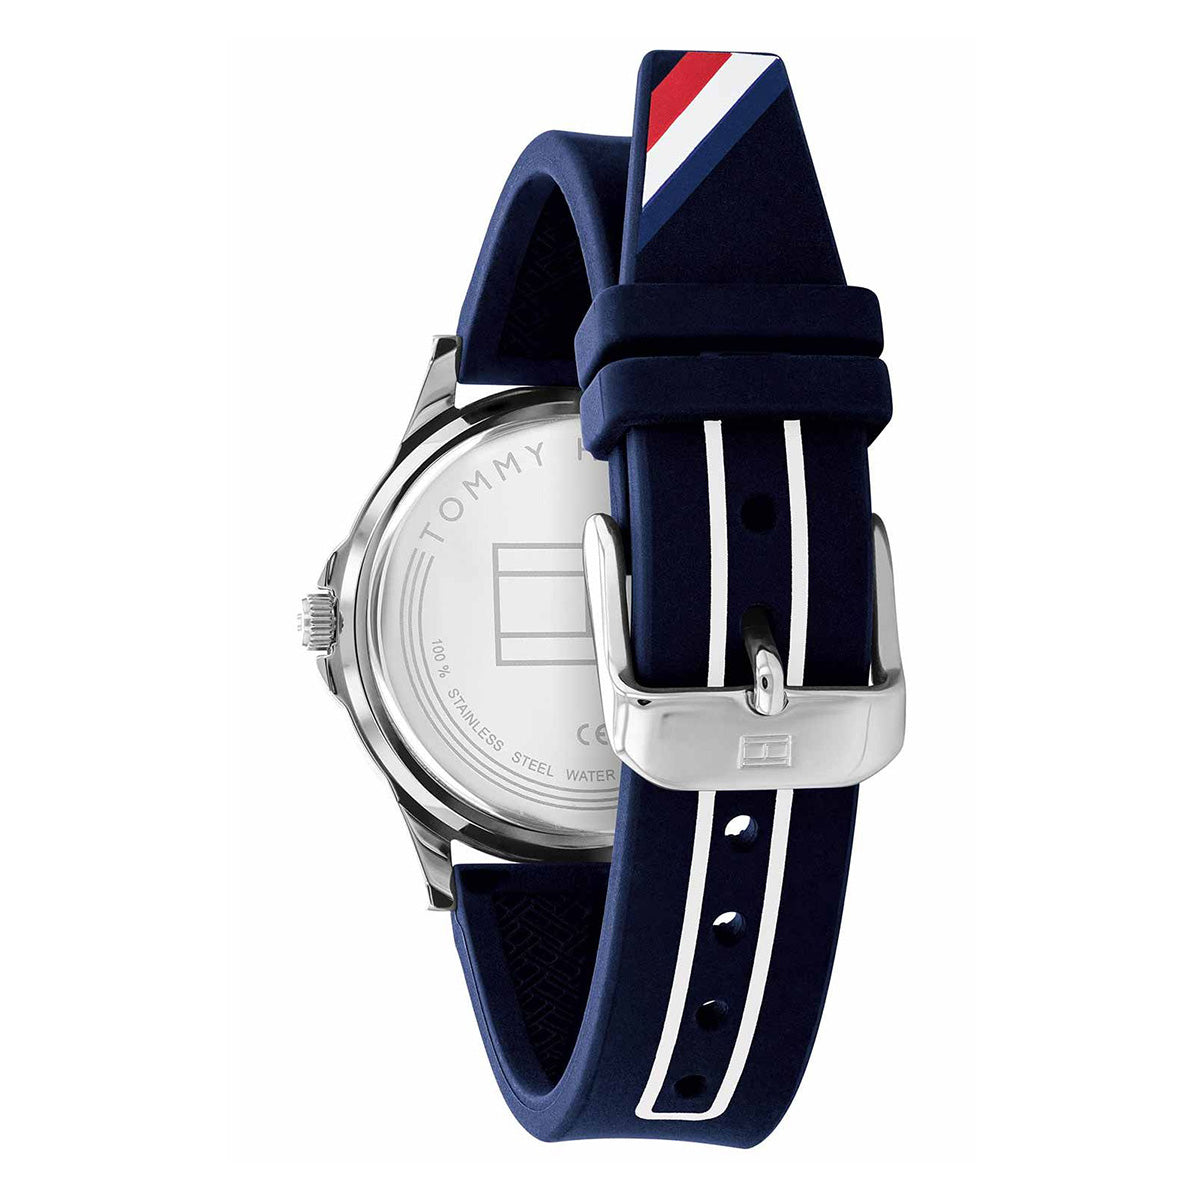 Tommy Hilfiger - Youth - 172.0016